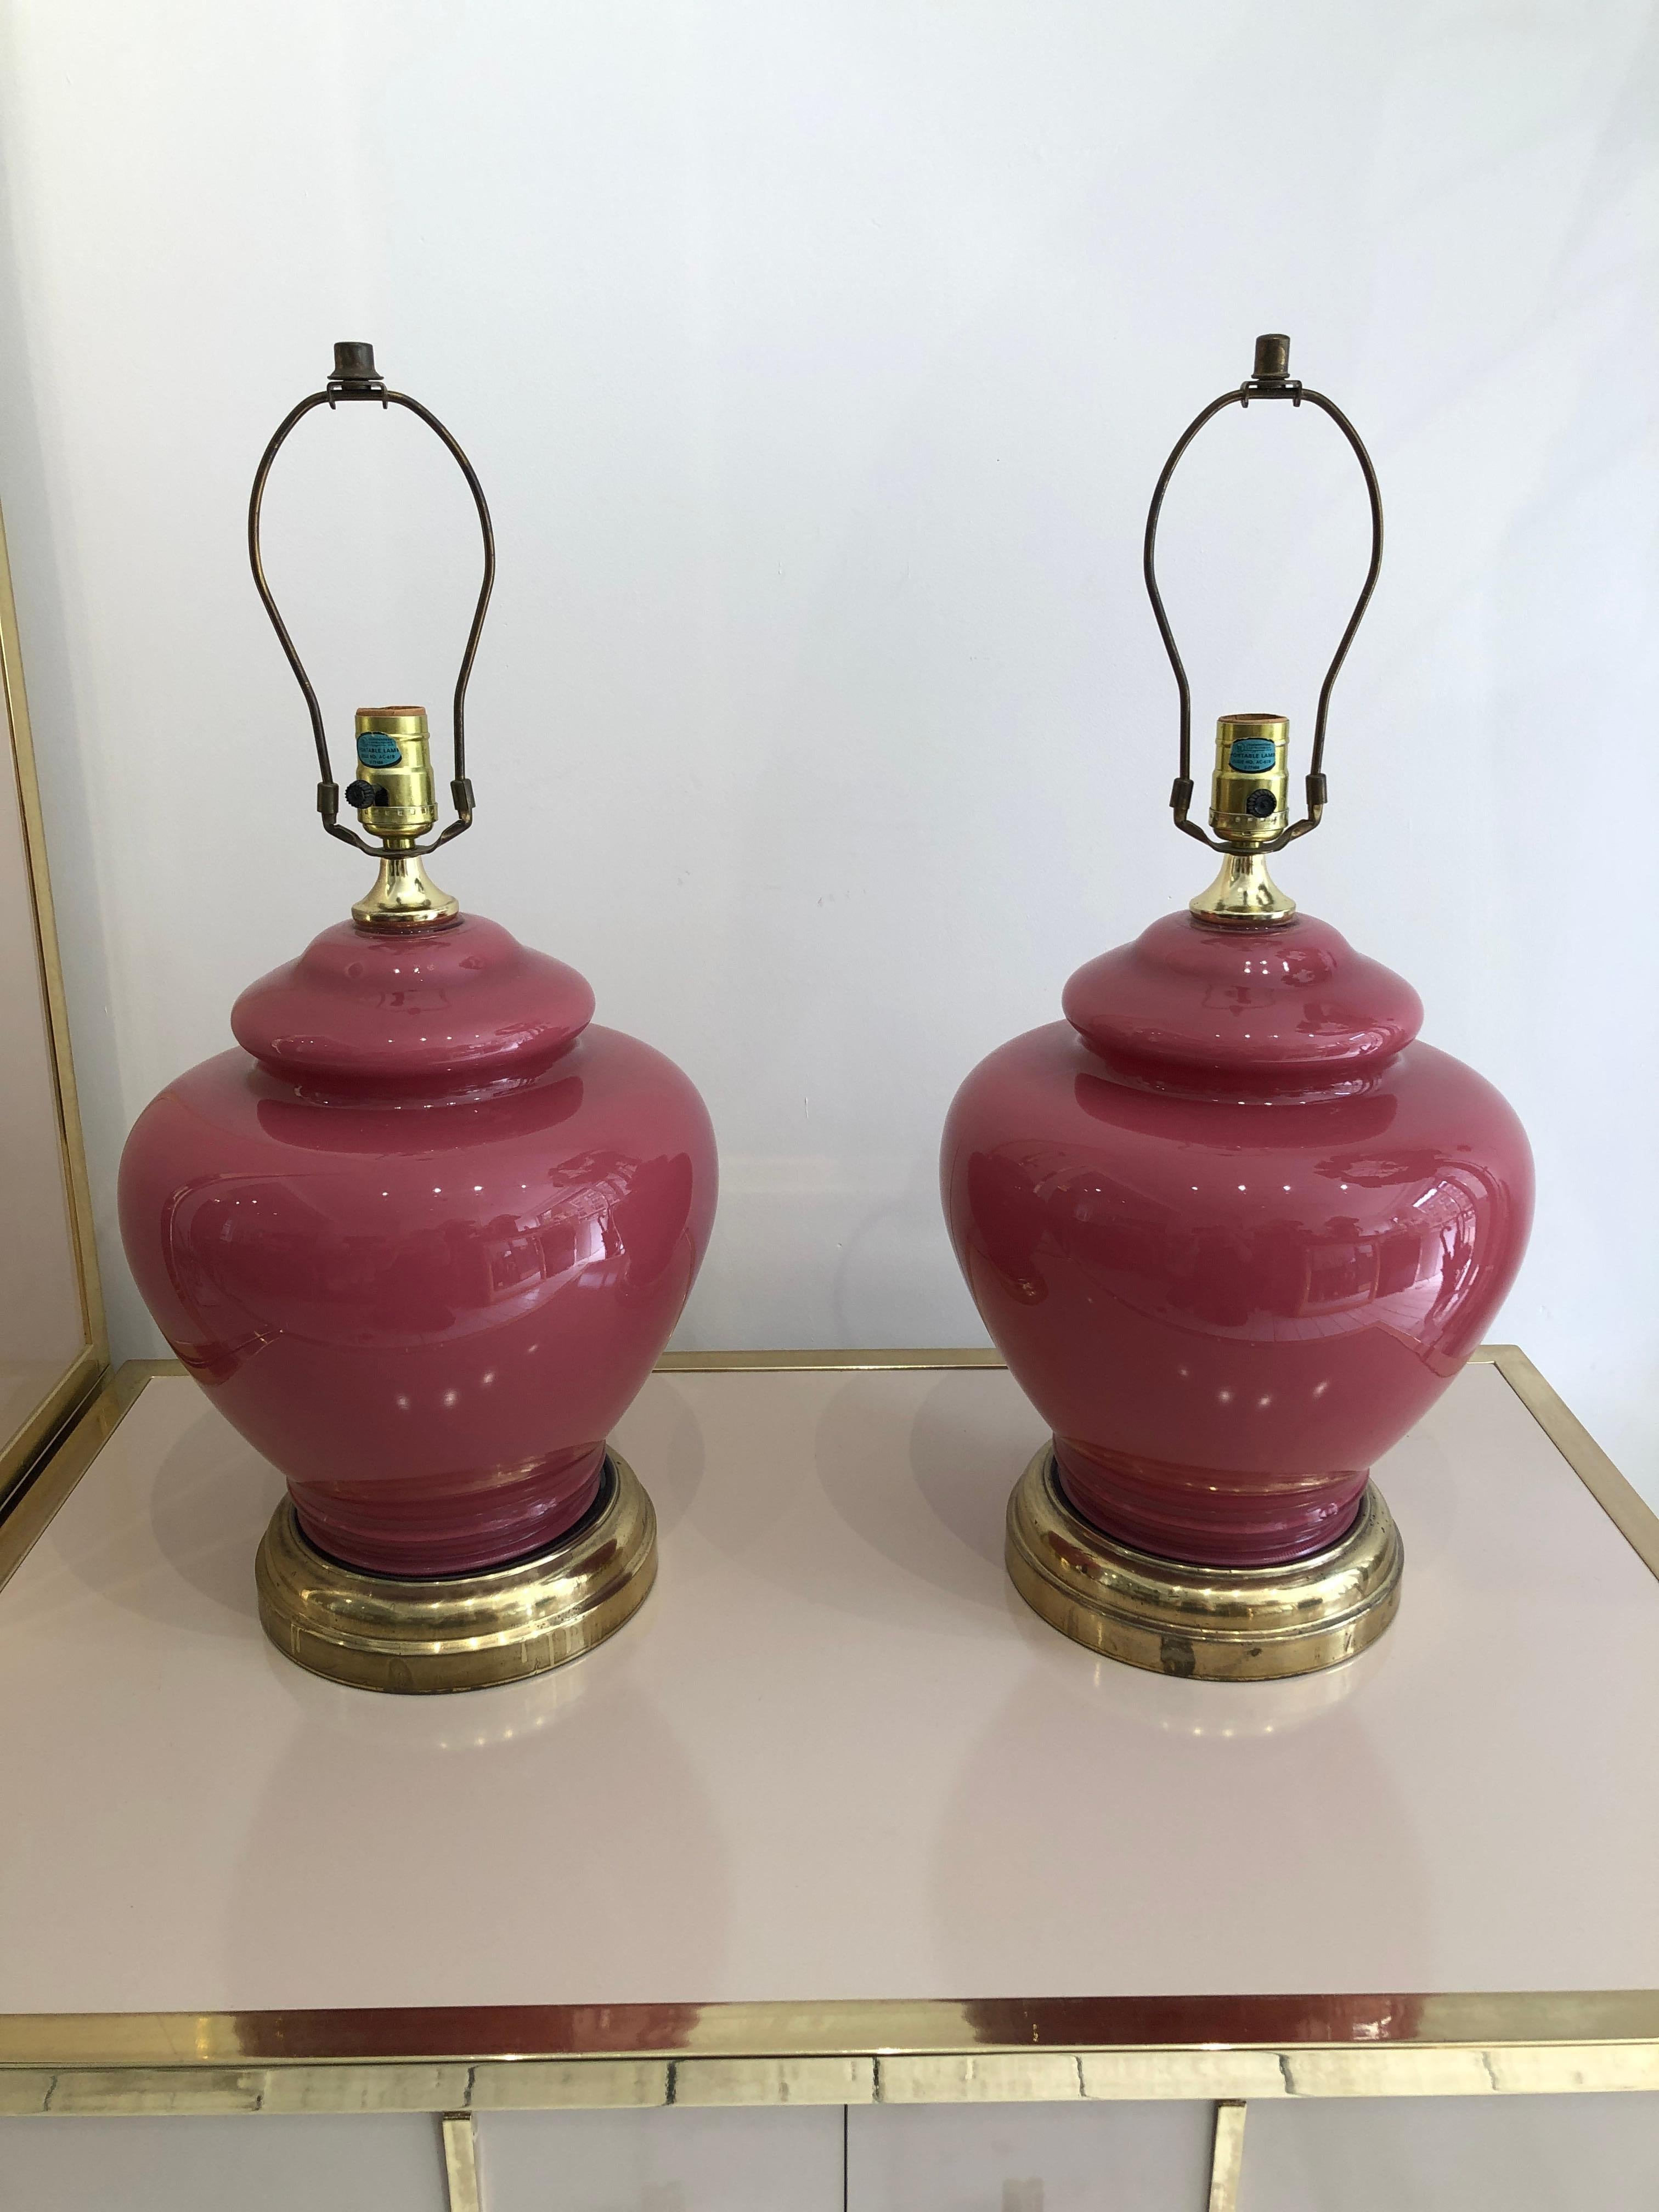 This pair of bulbous glass table lamps, in a fetching raspberry pink, were imported from the USA, and originally created in the 1970s. The lamp base is large, and the fittings are finished in a lovely brass. This piece would make a wonderful retro